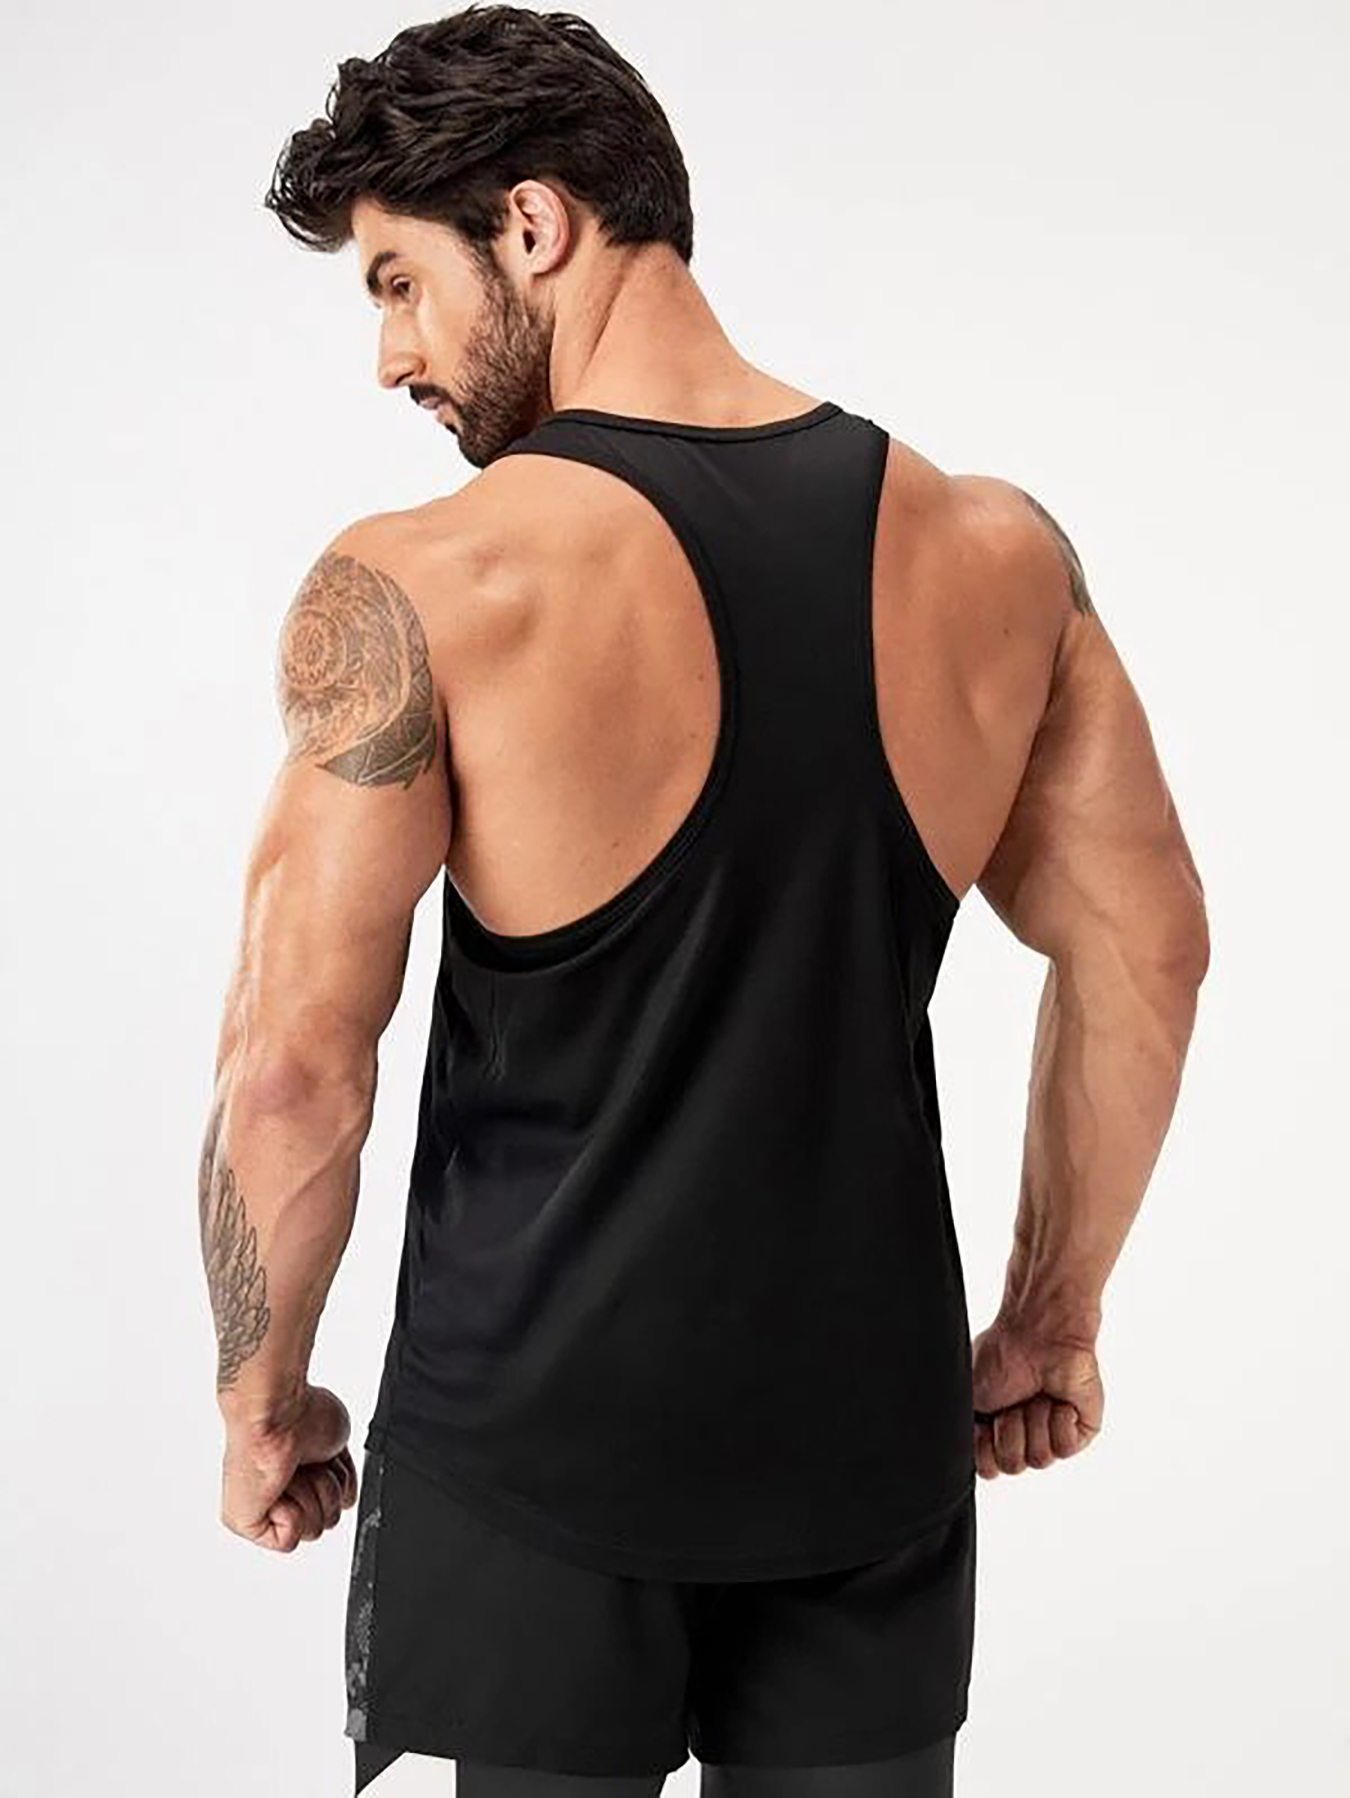 Space Administration Print A-shirt Tanks, Men's Singlet, Sleeveless Tank  Top, Lightweight Active Undershirts, For Workout At The Gym, Bodybuilding,  And As Gifts - Temu